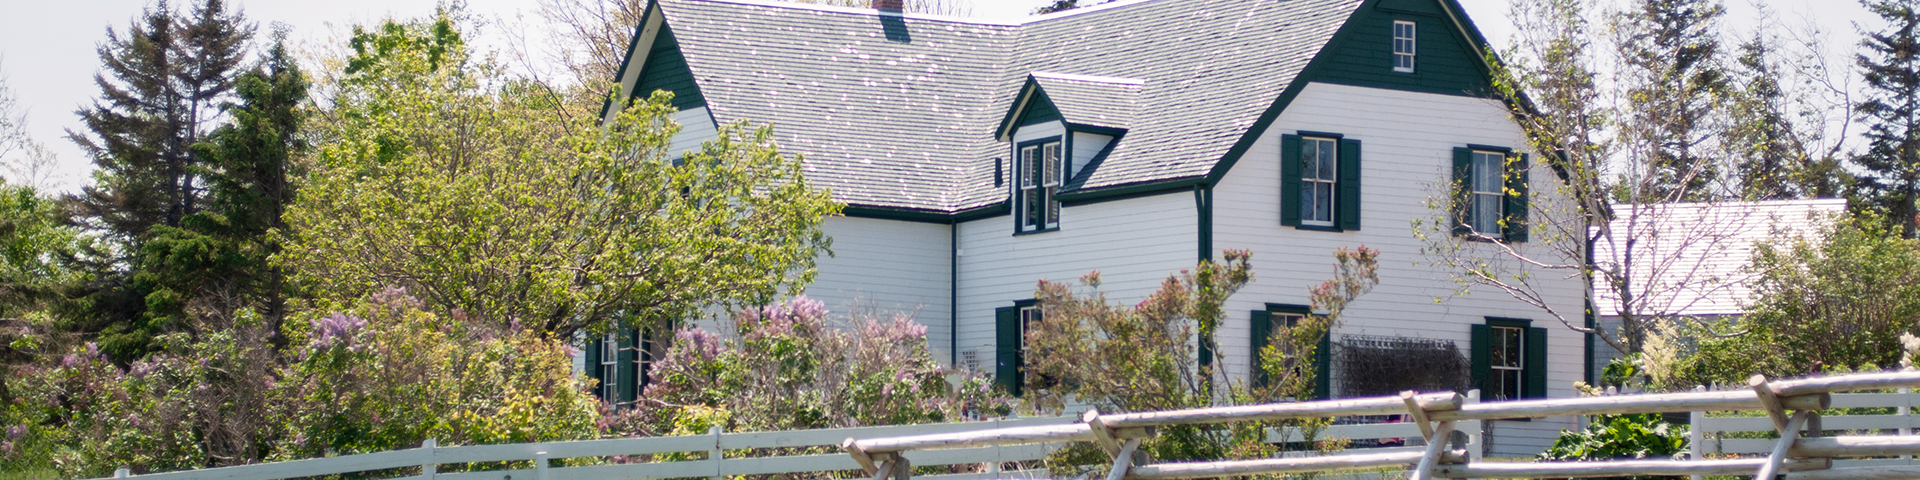 A view of Green Gables house